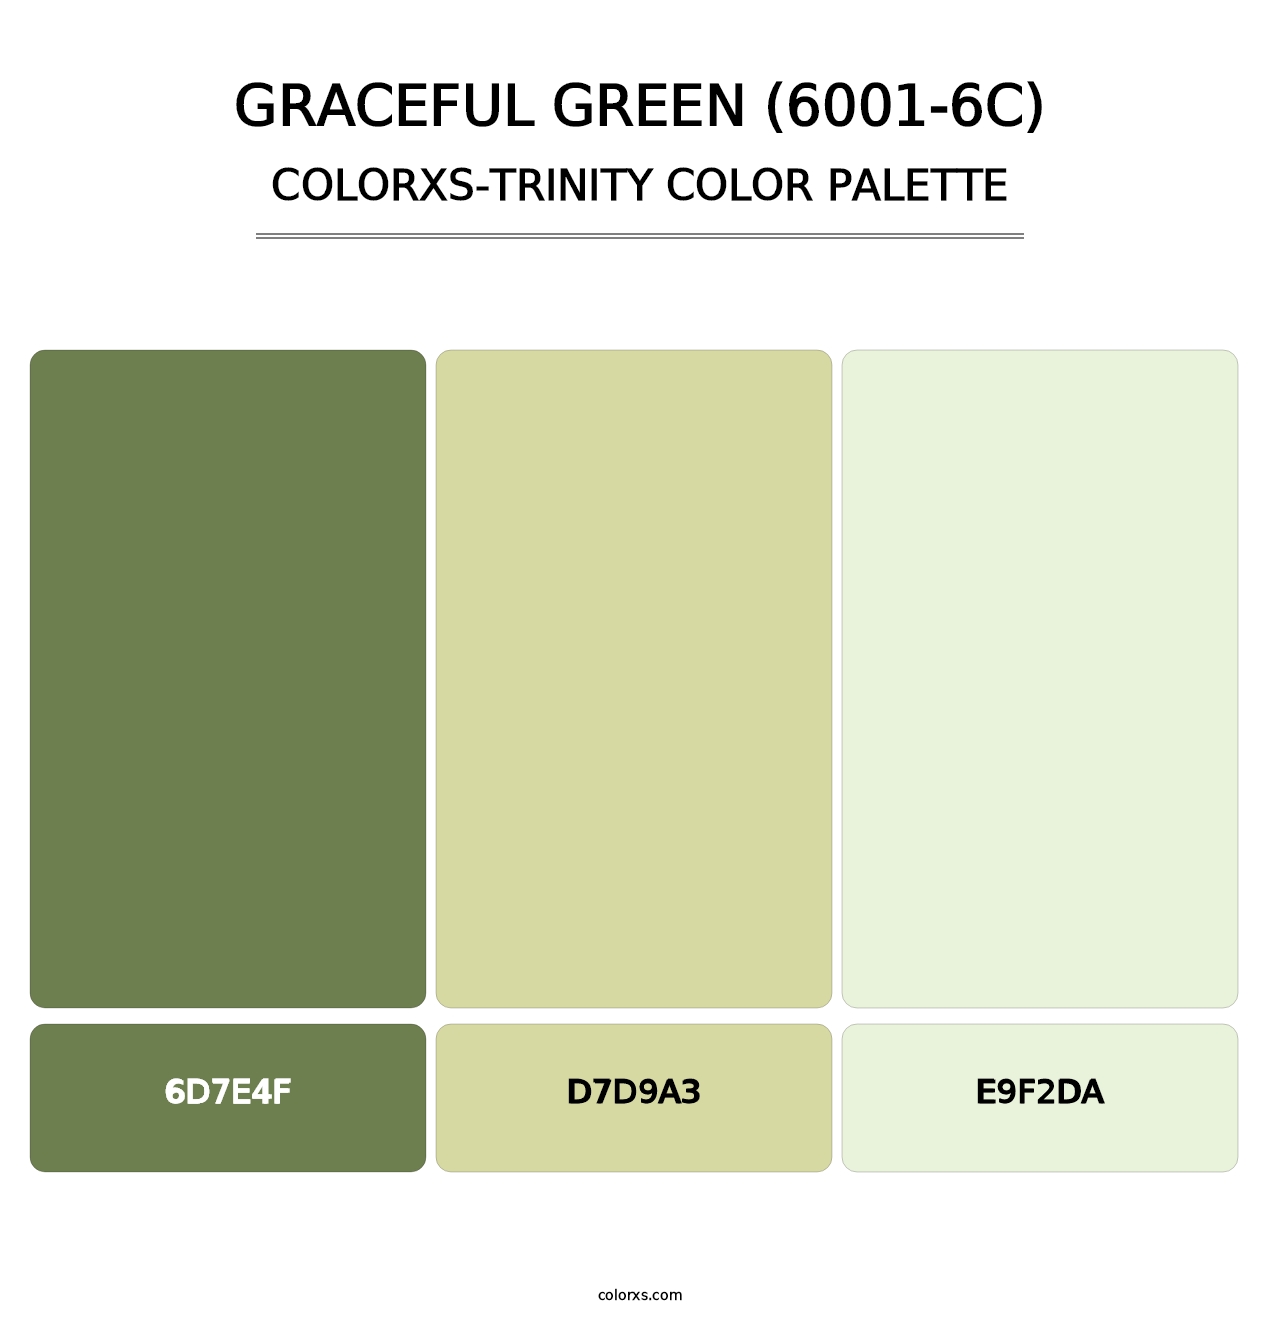 Graceful Green (6001-6C) - Colorxs Trinity Palette